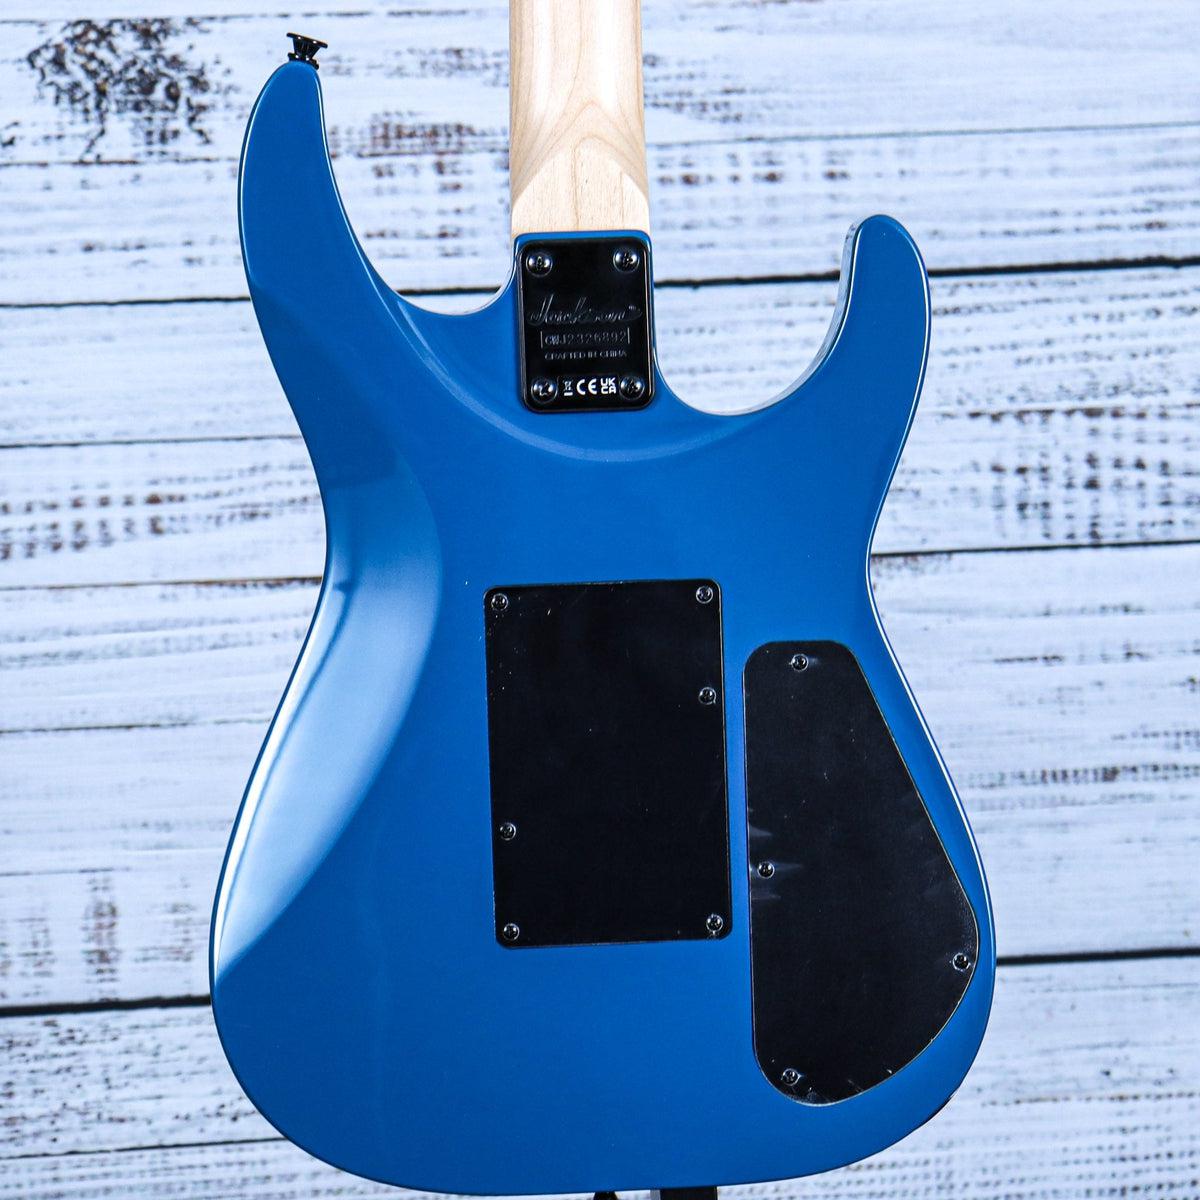 Jackson JS32 Dinky Arch Top LH Electric Guitar | Bright Blue